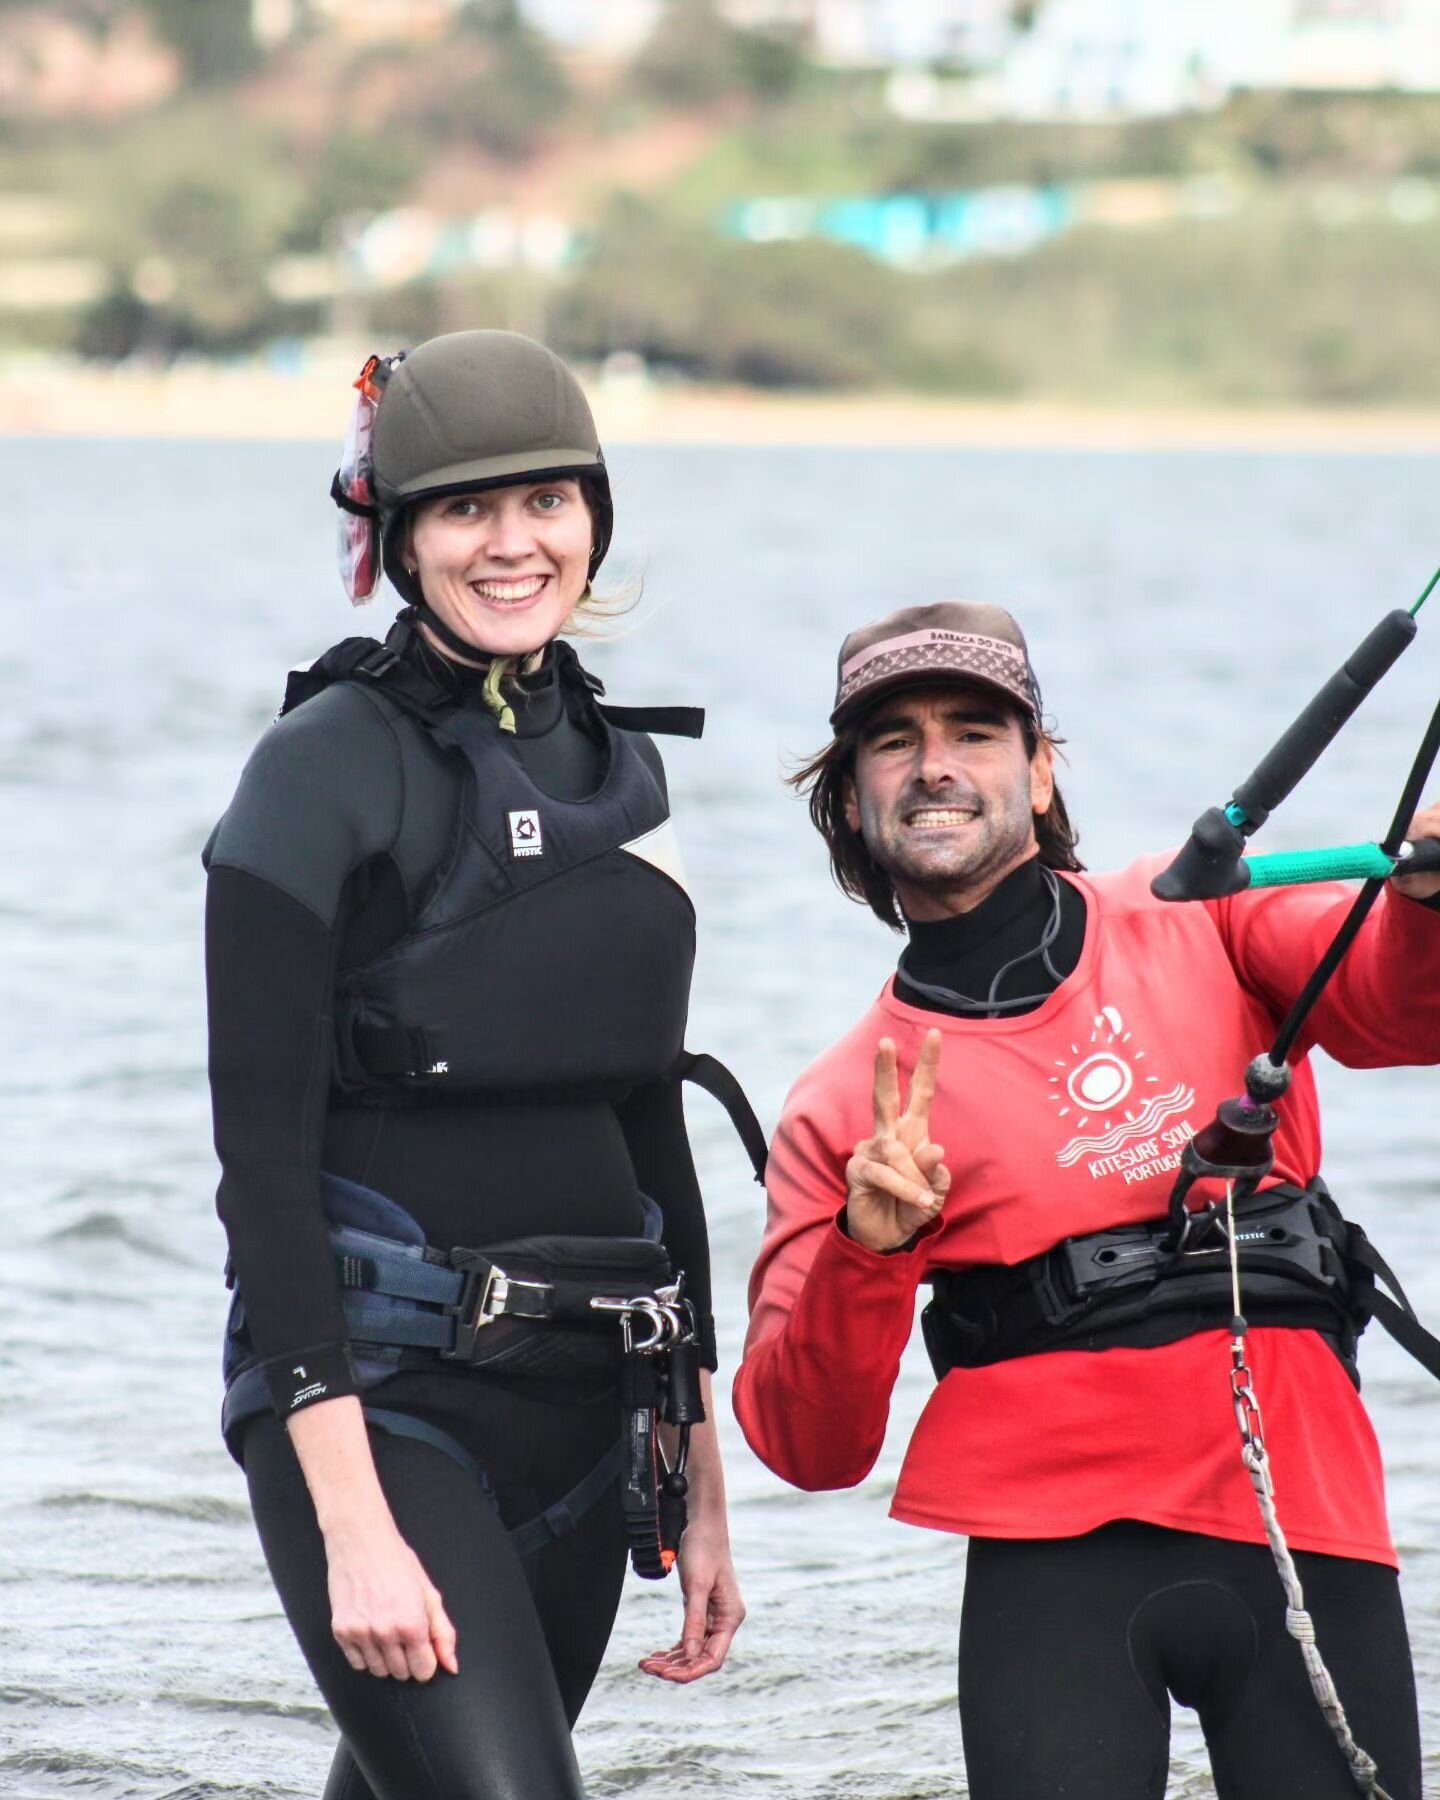 Blessed with a good forecast for this week! We offer lessons for complete beginners in the safety of our shallow and flat water lagoon, and under the guidance of our highly experienced instructors ☀️

Our team has many years of teaching this sport al